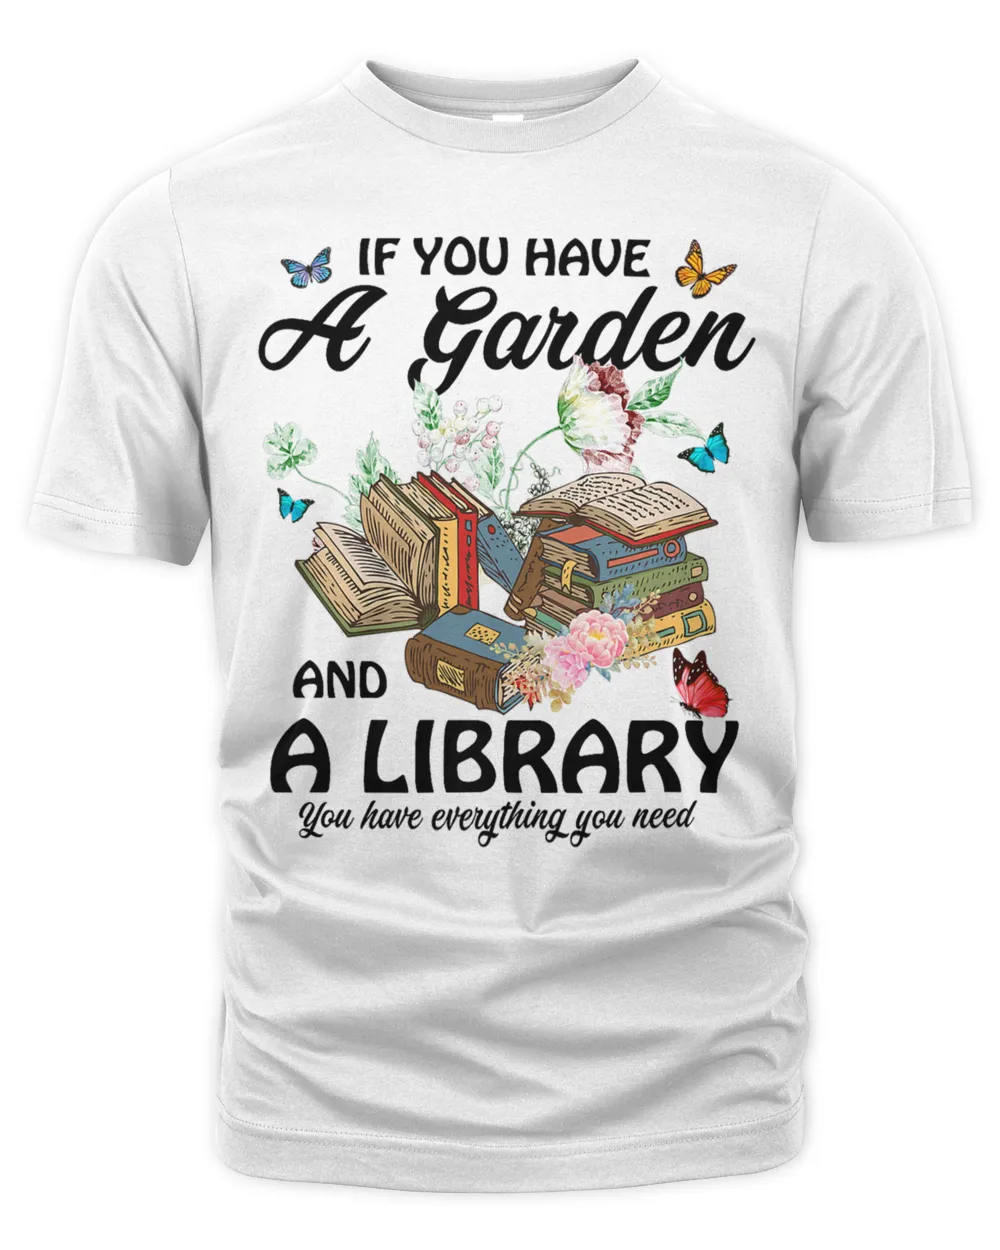 If you have a garden and a library